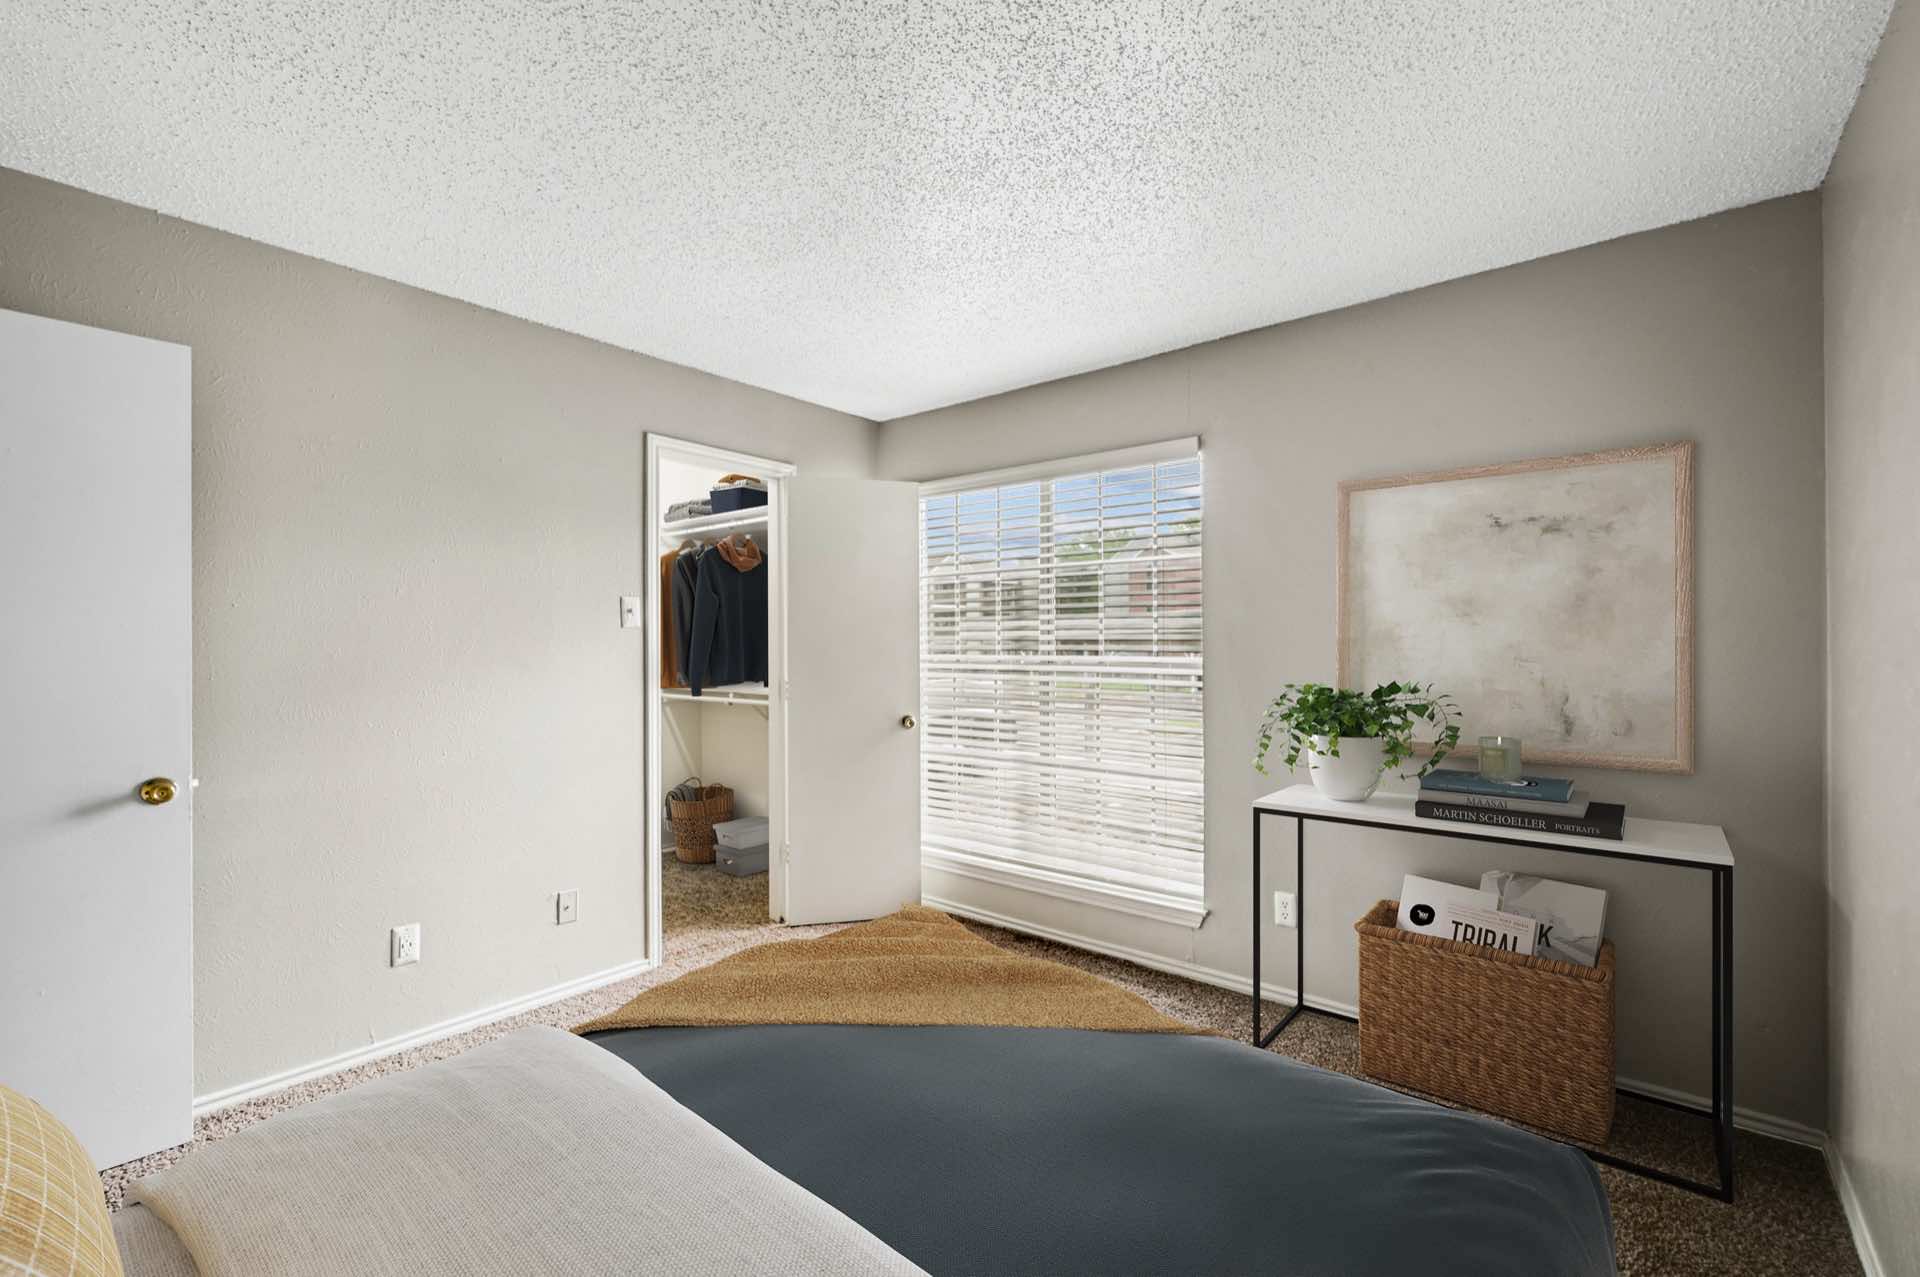 Bedroom with walk-in closet and large window